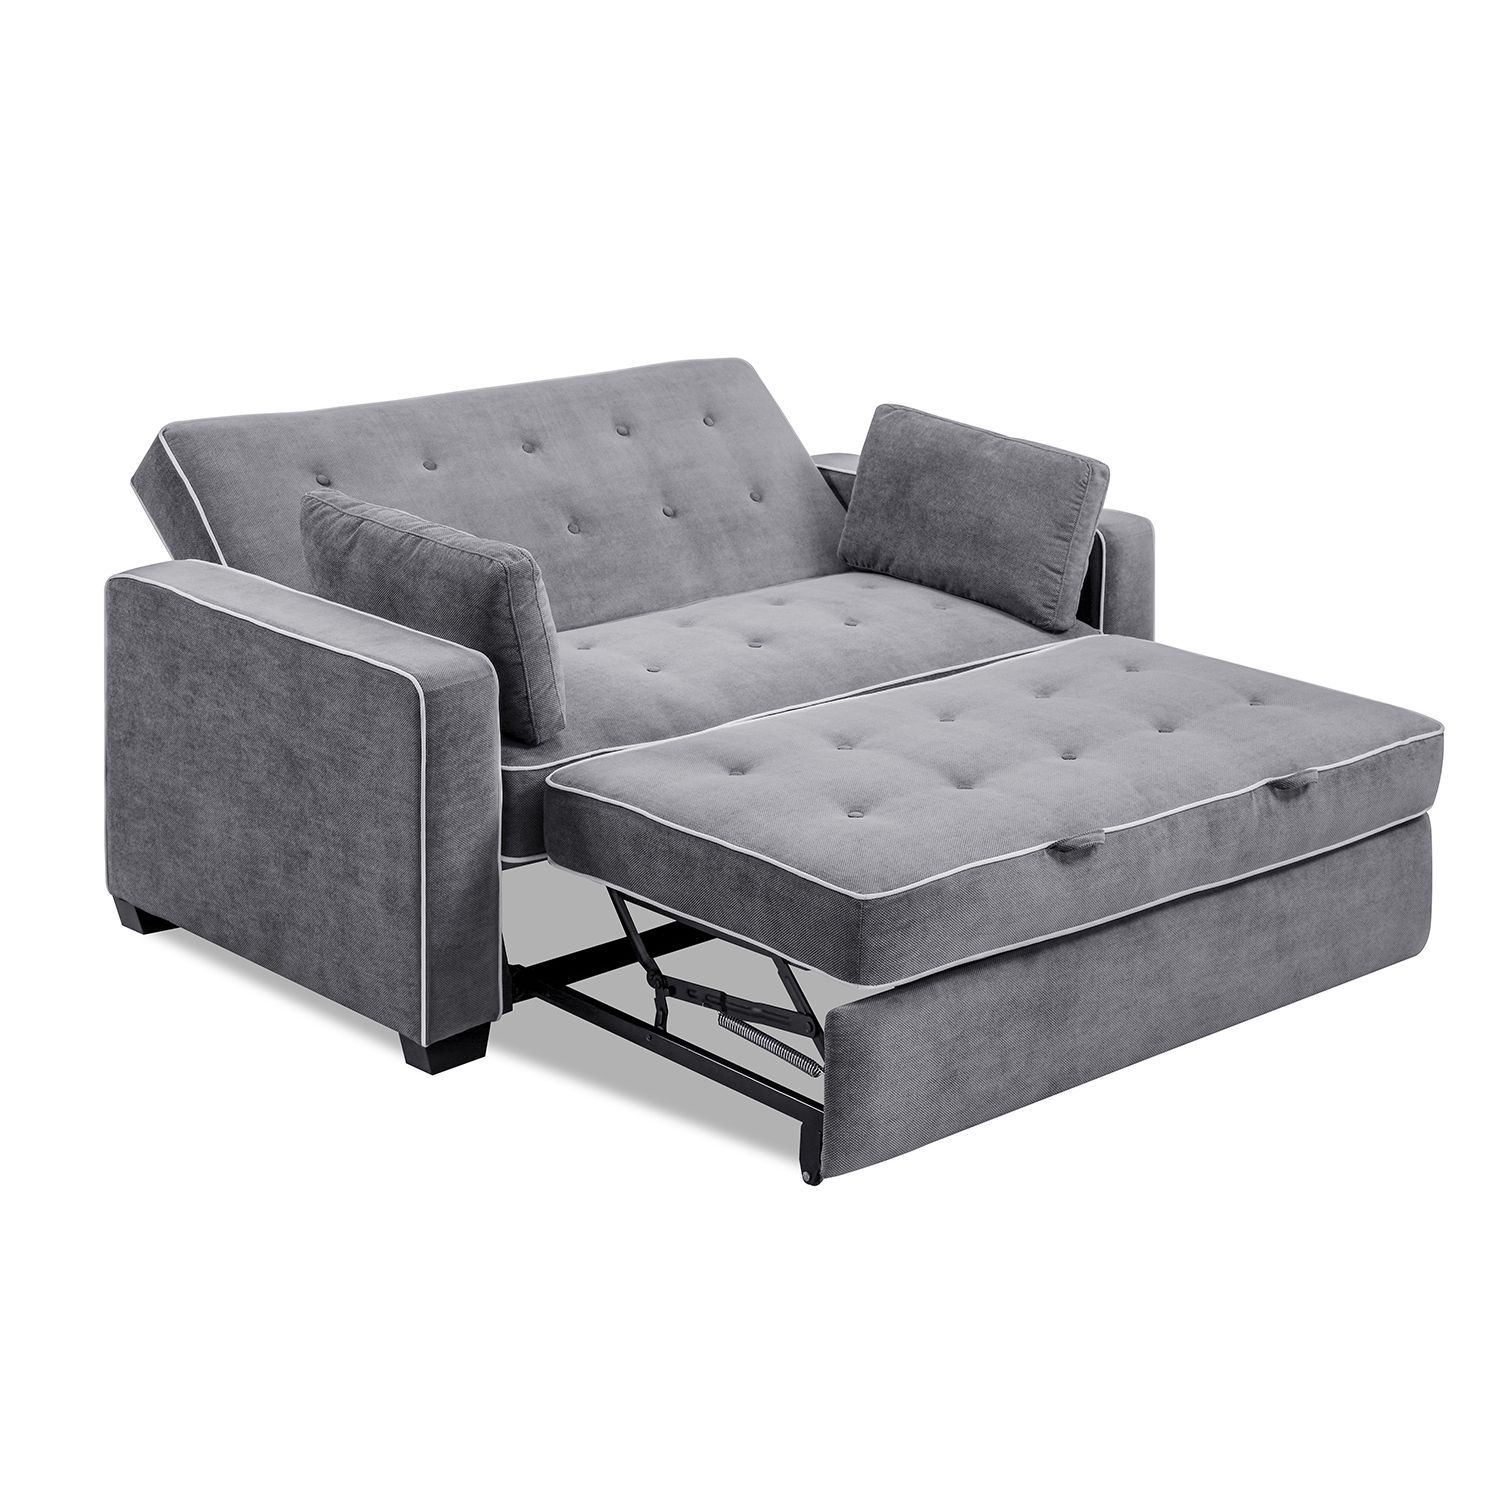 Serta Augustus Convertible Queen Sofa Bed | Sofa Bed Queen, Sofa Bed Intended For 3 In 1 Gray Pull Out Sleeper Sofas (View 13 of 20)